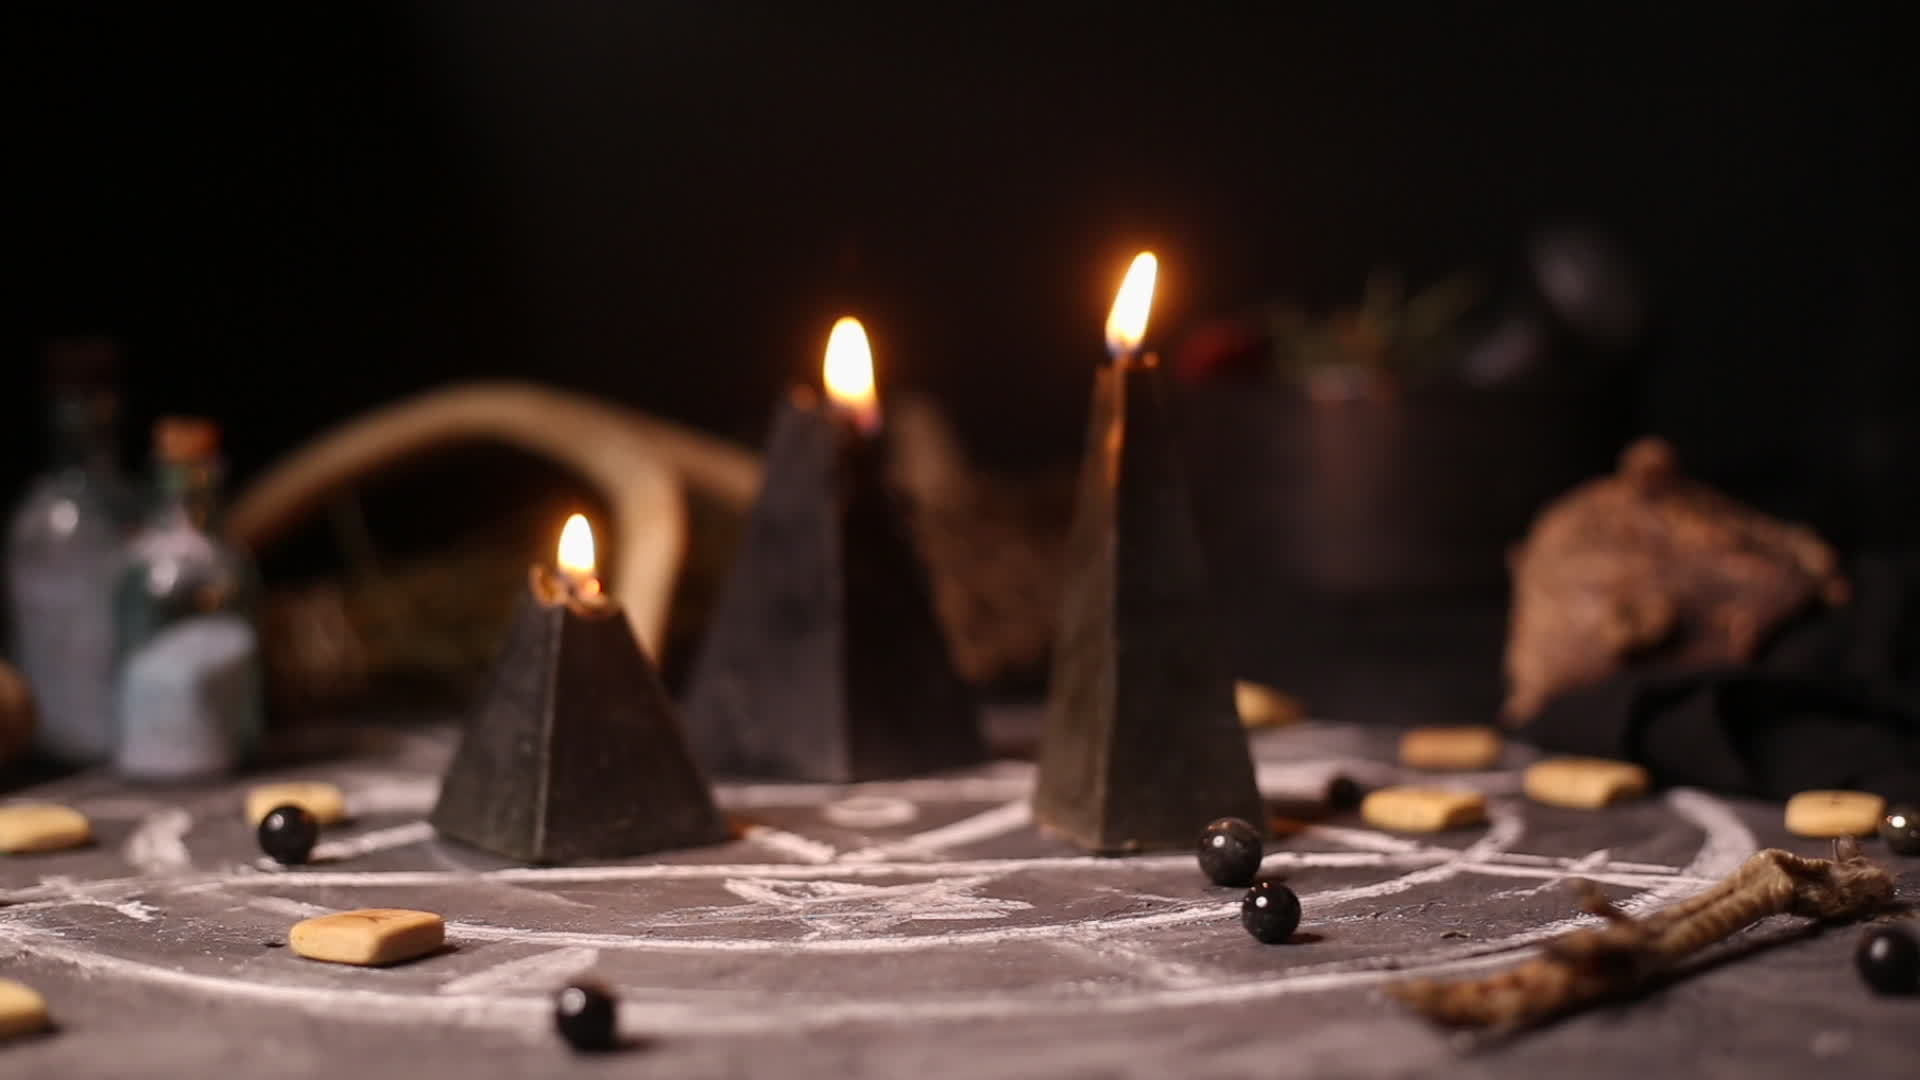 black-magic-candles-burn-smoke-on-the-background-of-the-magical-attributes-of-black-art-halloween-concept-video-dedf5238